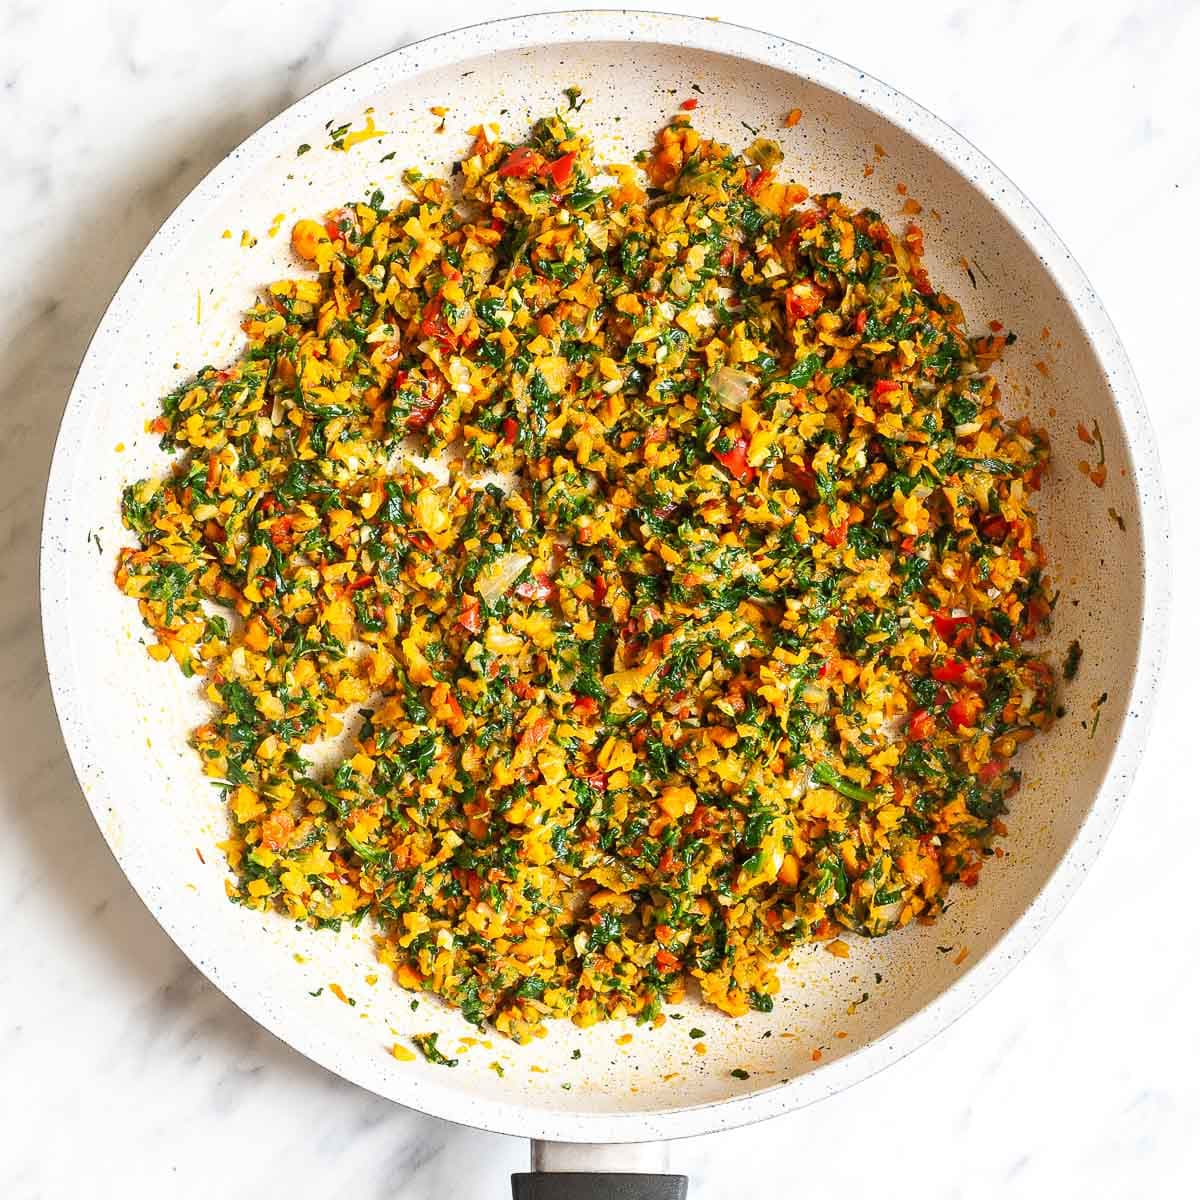 White frying pan with finely chopped spinach, carrots, onion, red pepper, and garlic pieces.